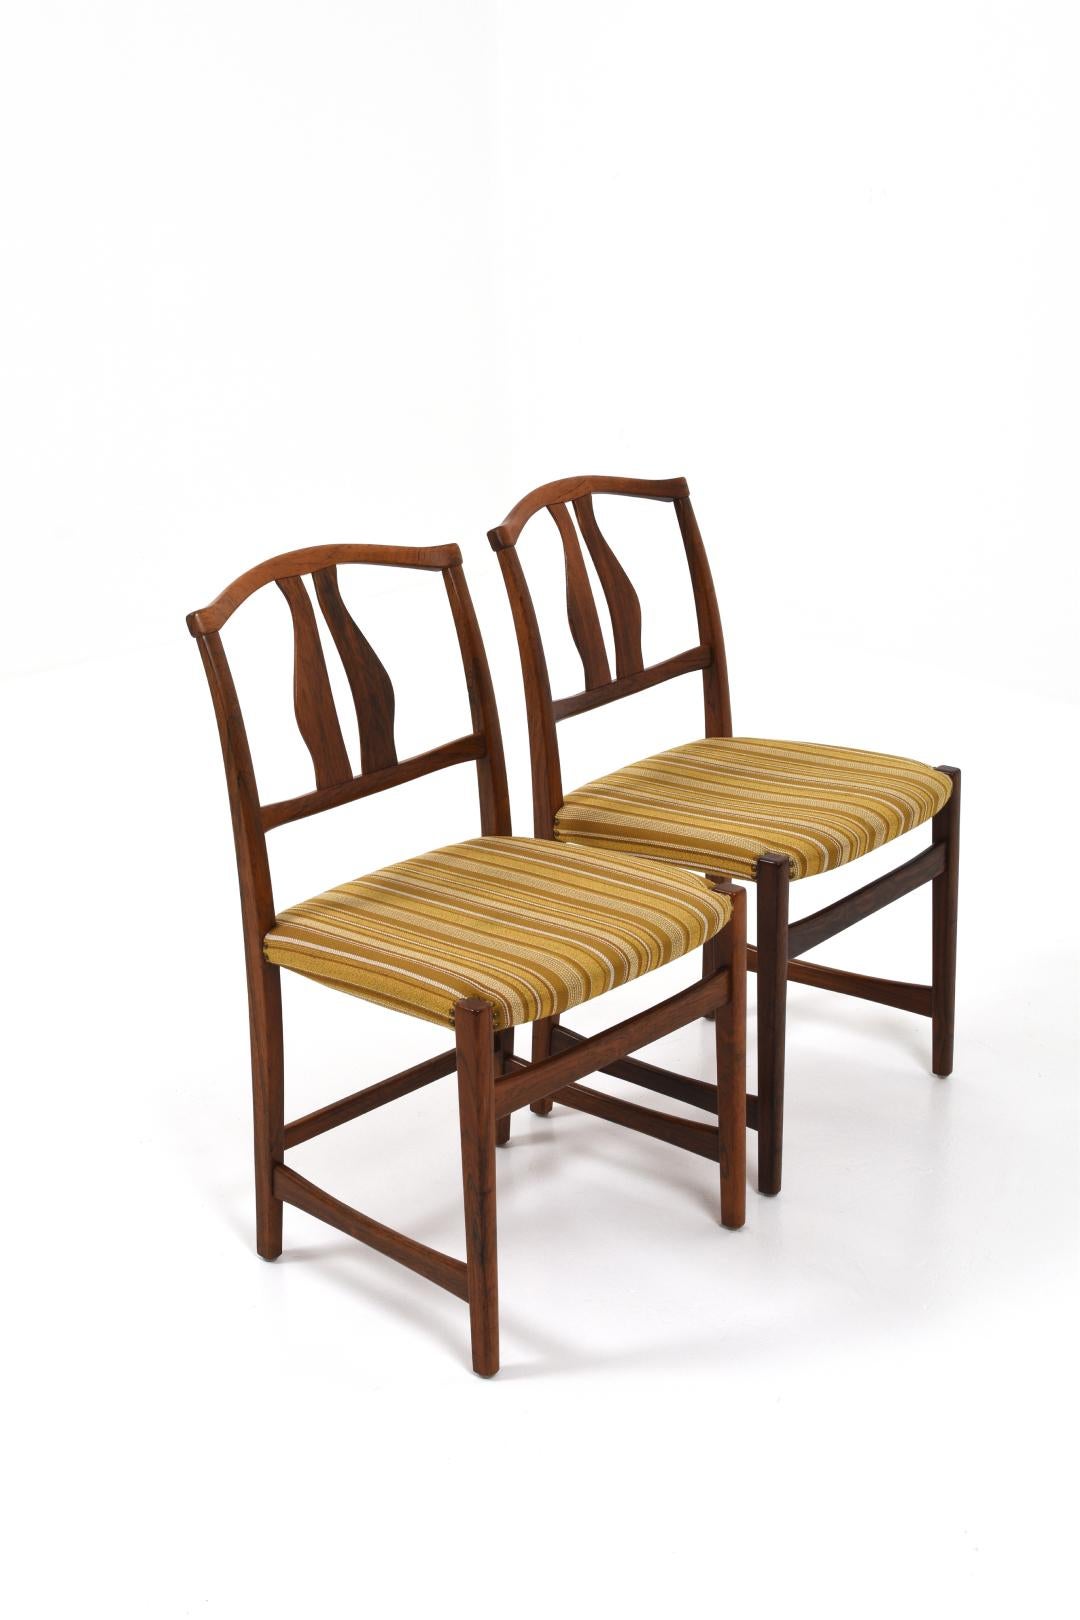 Vidar's chair is an iconic chair by Carl Malmsten's son Vidar Malmsten in the 1970s. Widely used in the US and Canada in studio furniture maker training programs.